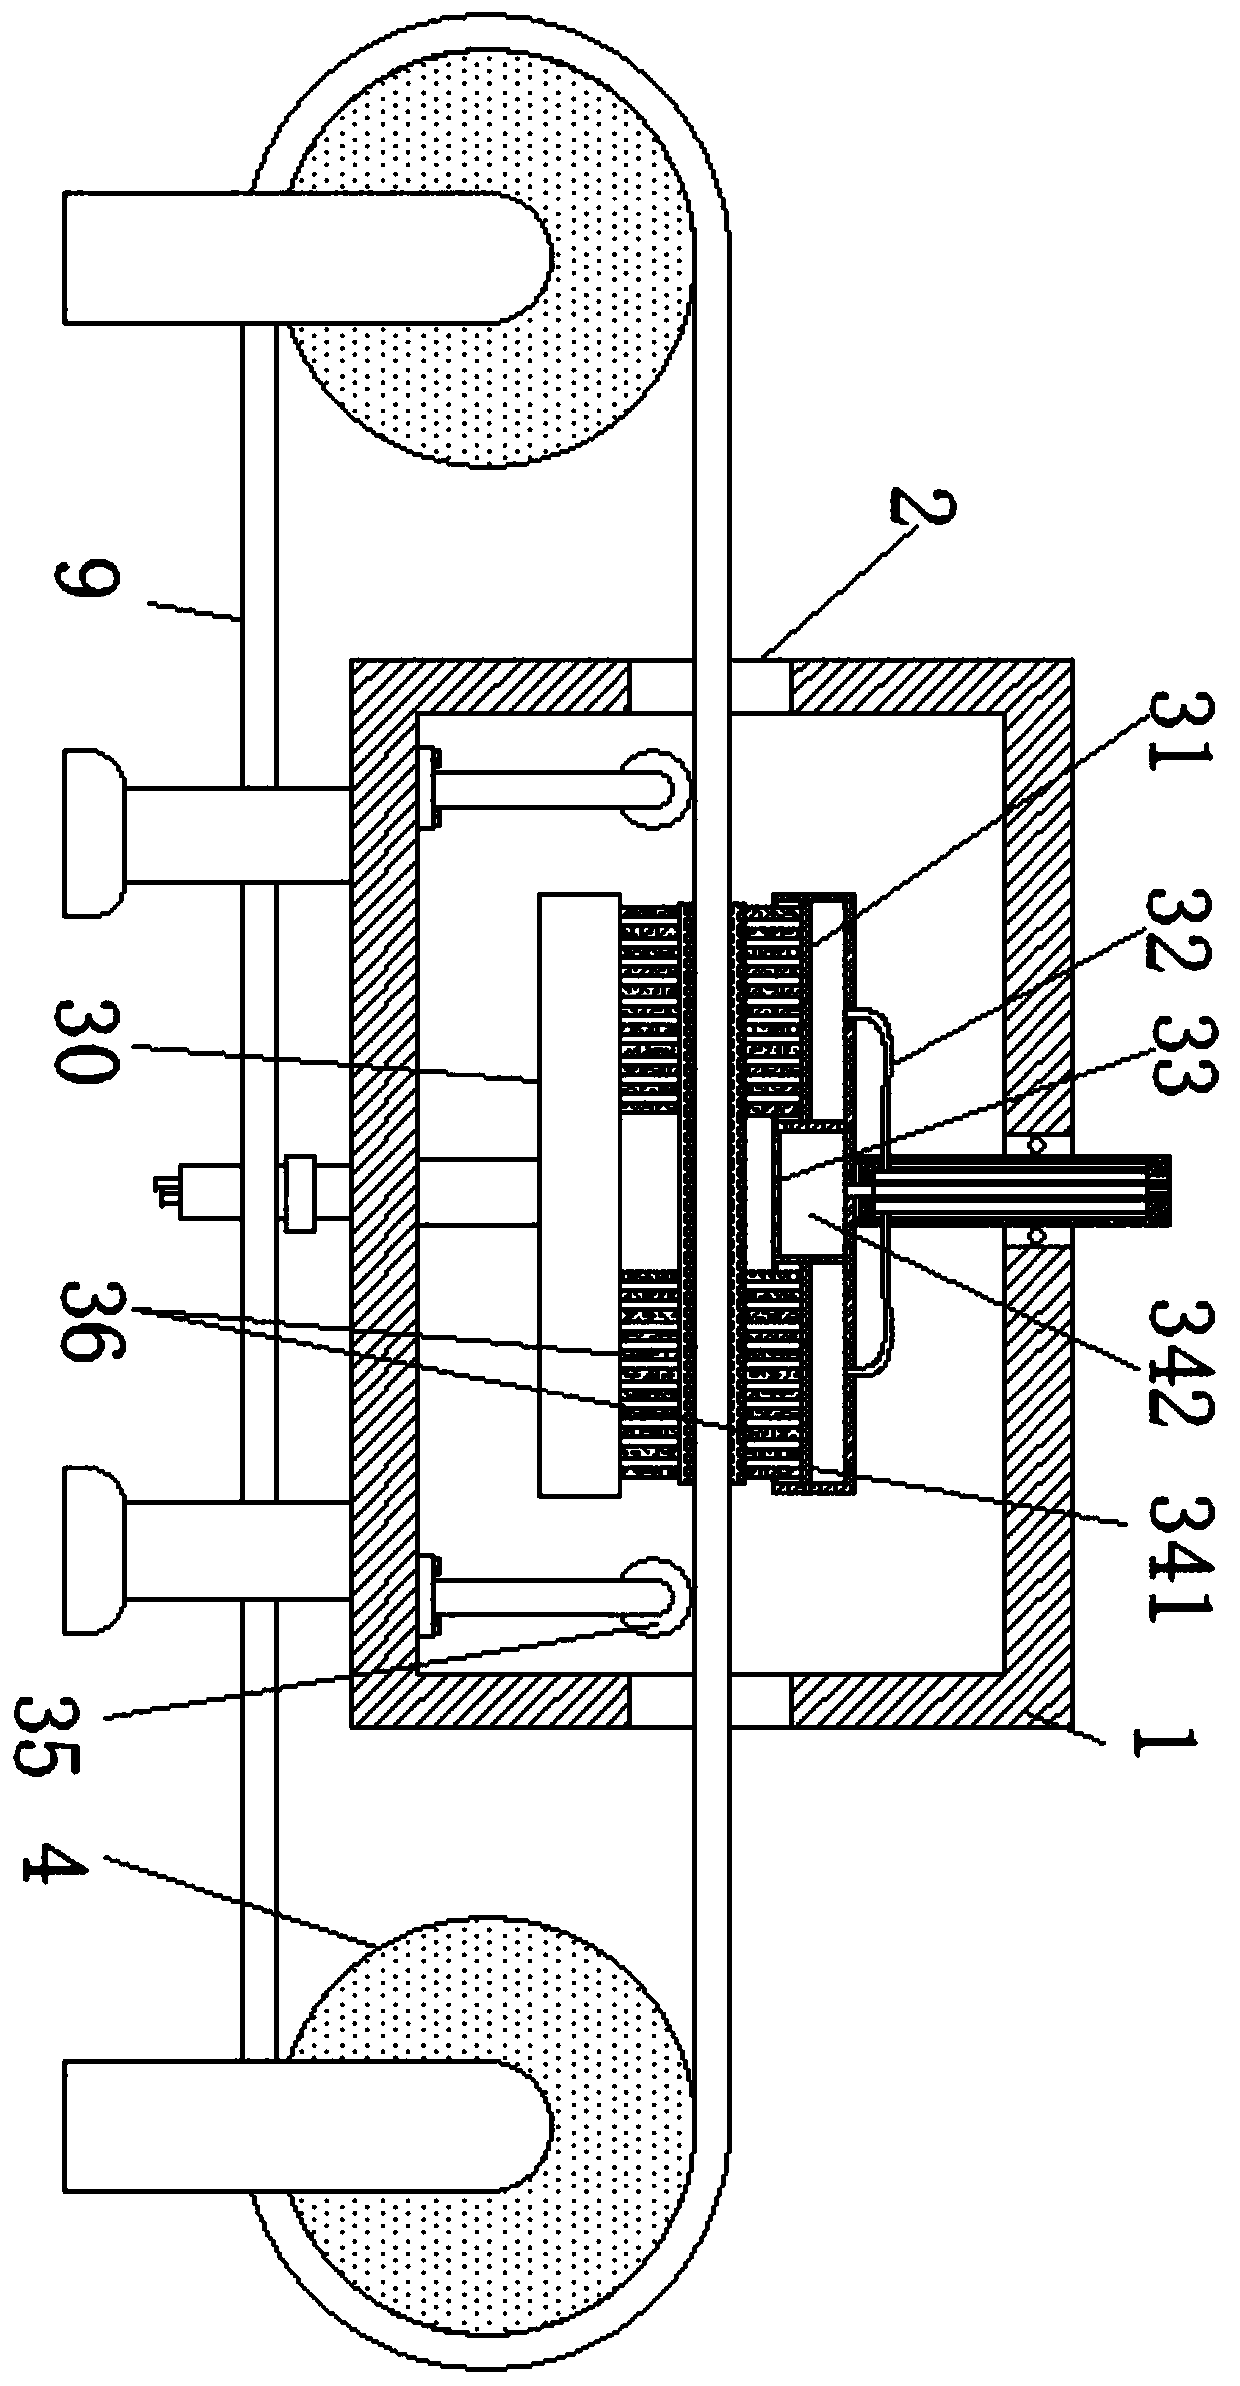 Building template grinding device